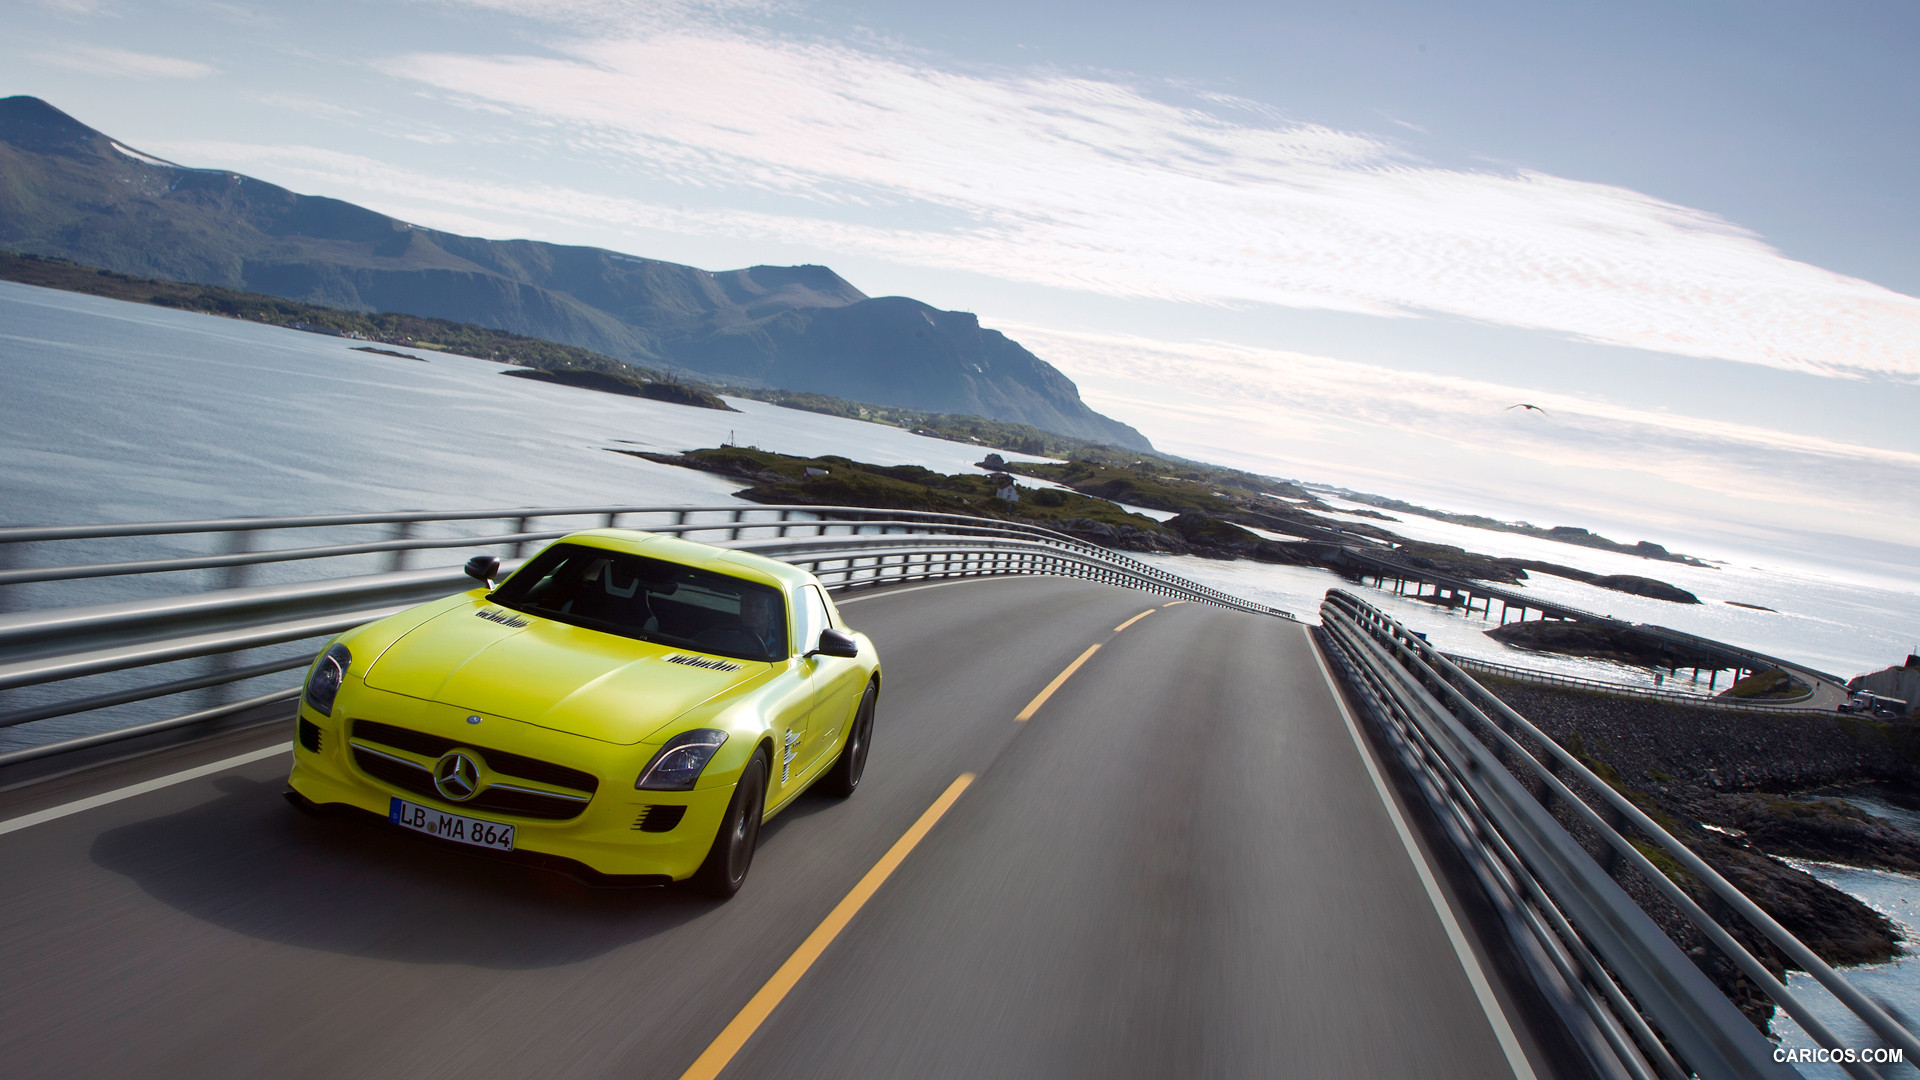 Mercedes-Benz SLS AMG E-CELL Concept  - Front, #31 of 60